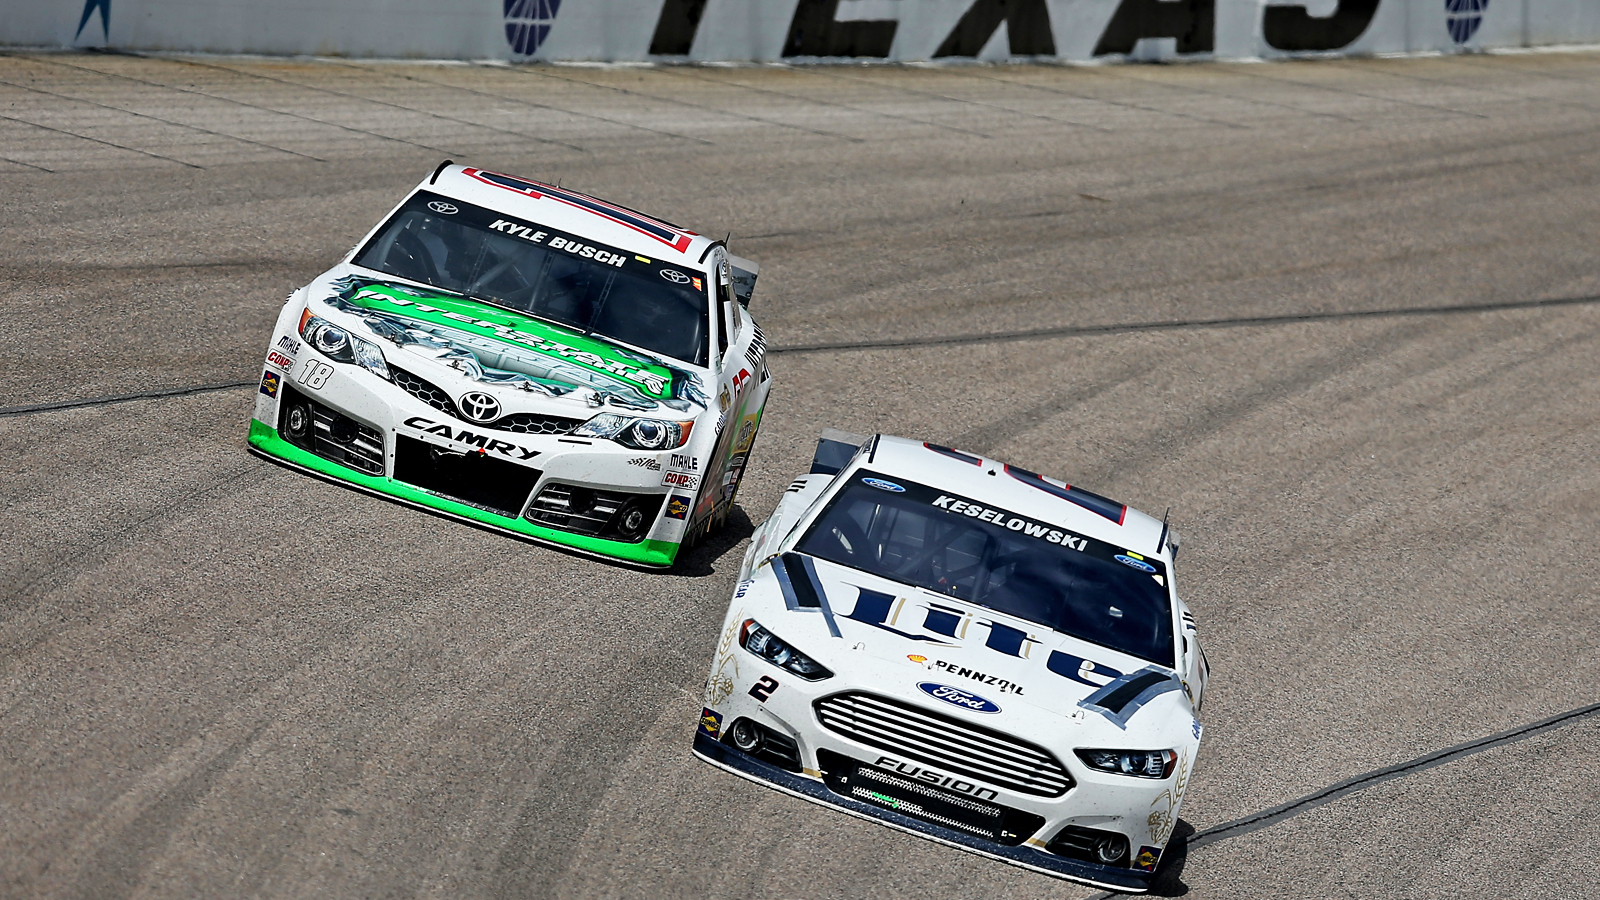 NASCAR Notebook: Key nuggets from the Duck Commander 500